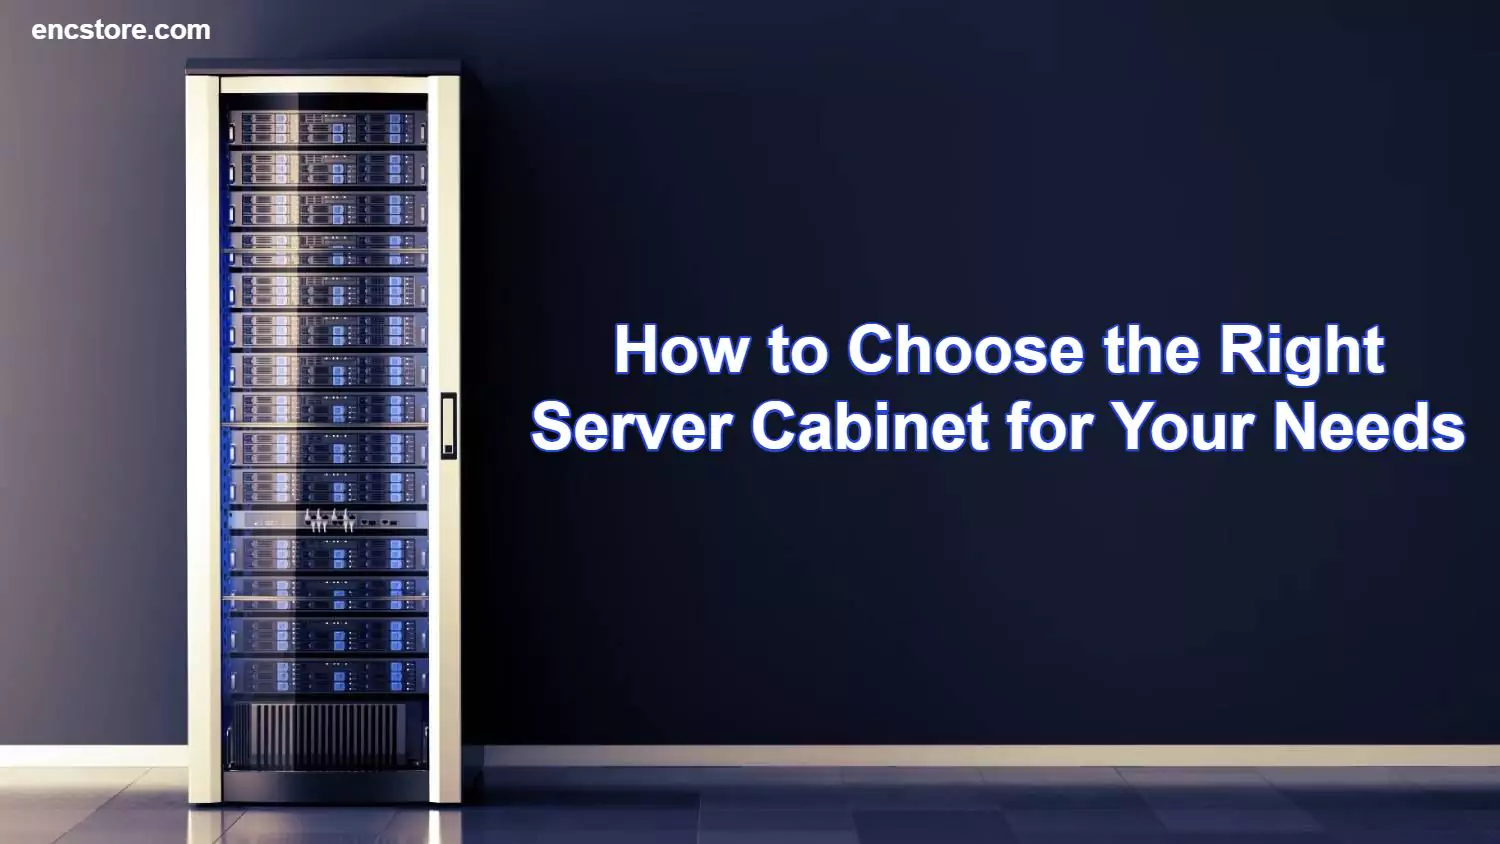 How to Choose the Right Server Cabinet for Your Needs